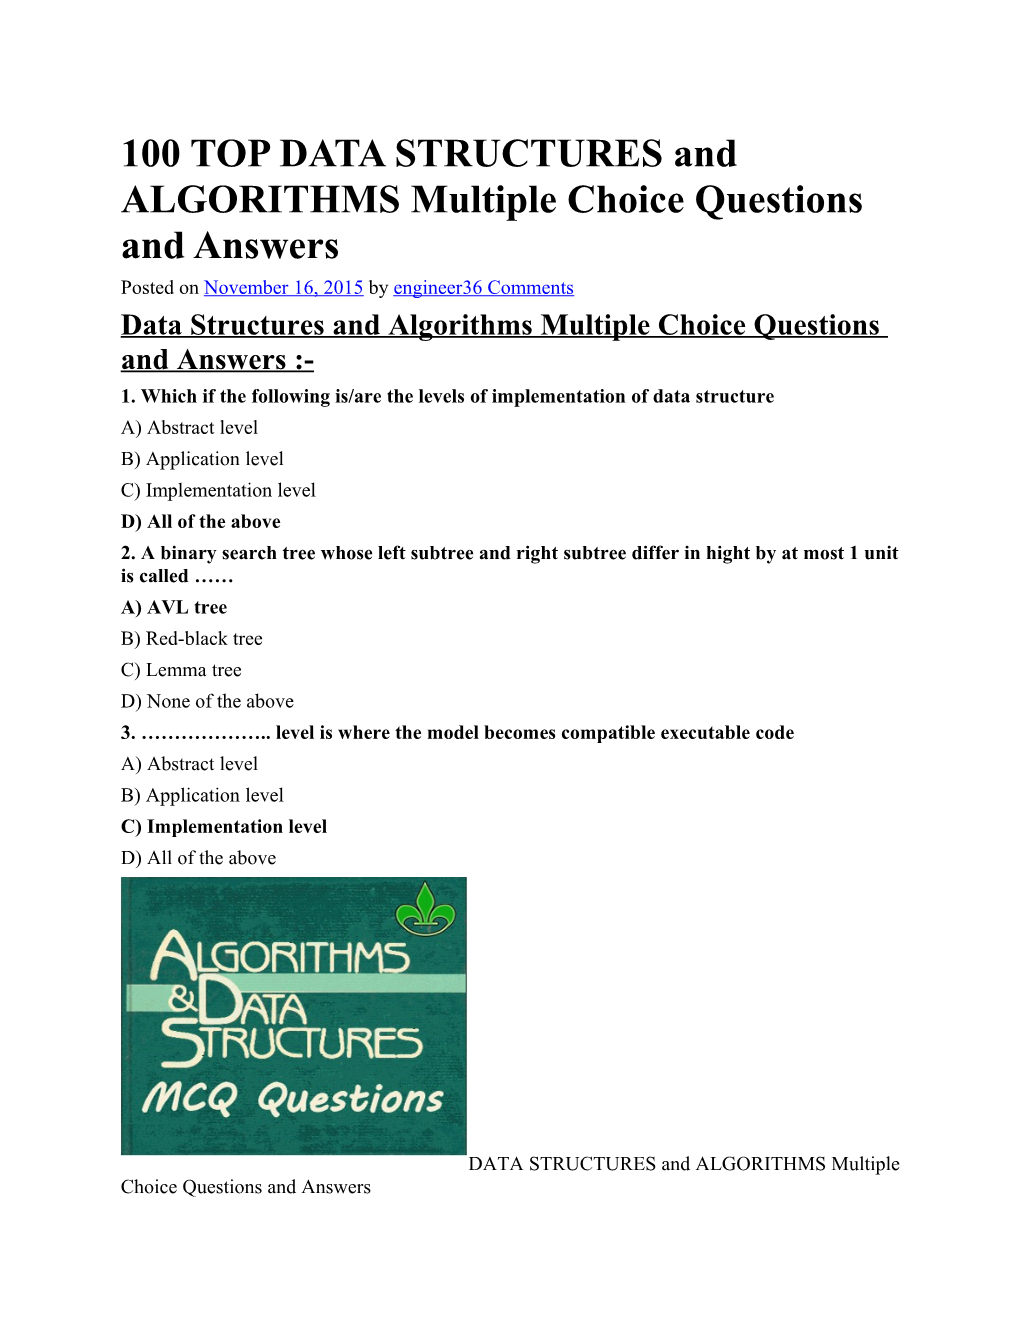 100 TOP DATA STRUCTURES and ALGORITHMS Multiple Choice Questions and Answers